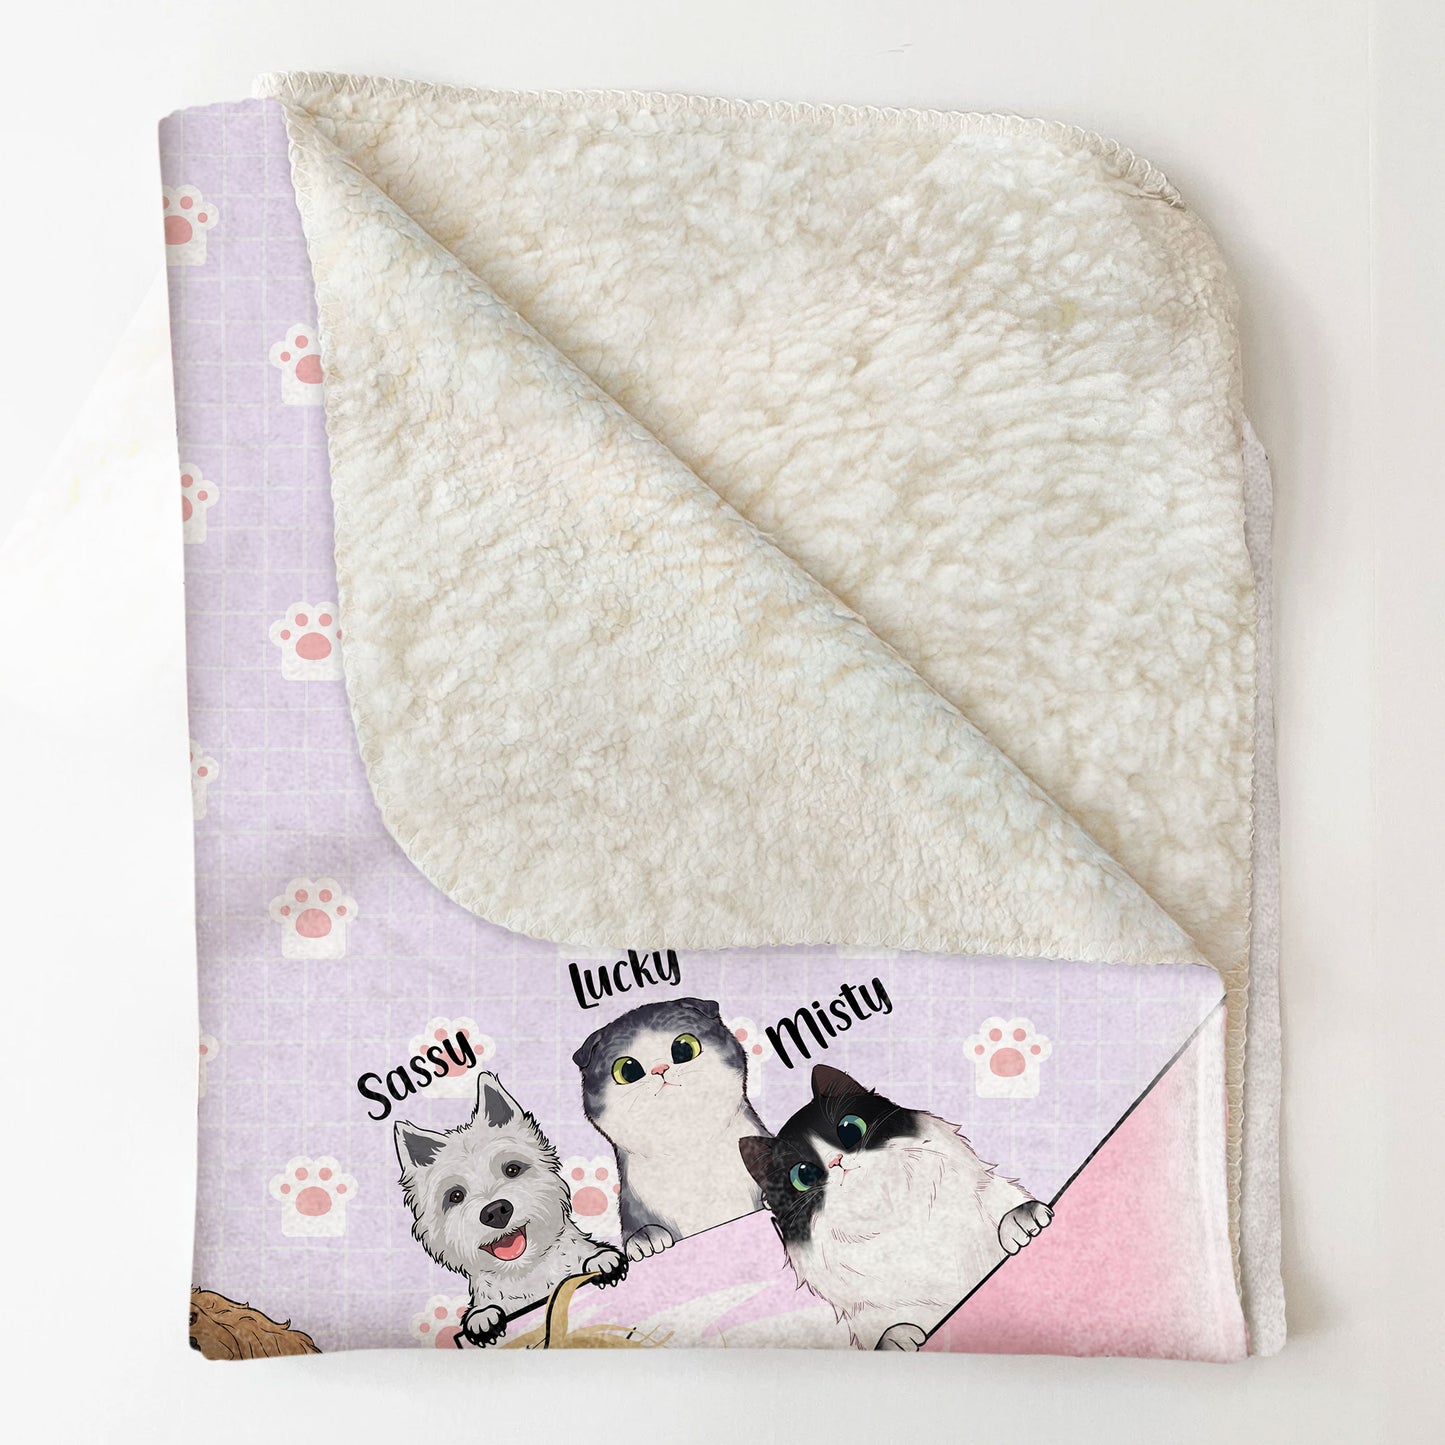 Just Want To Stay In Bed With My Pets - Personalized Blanket